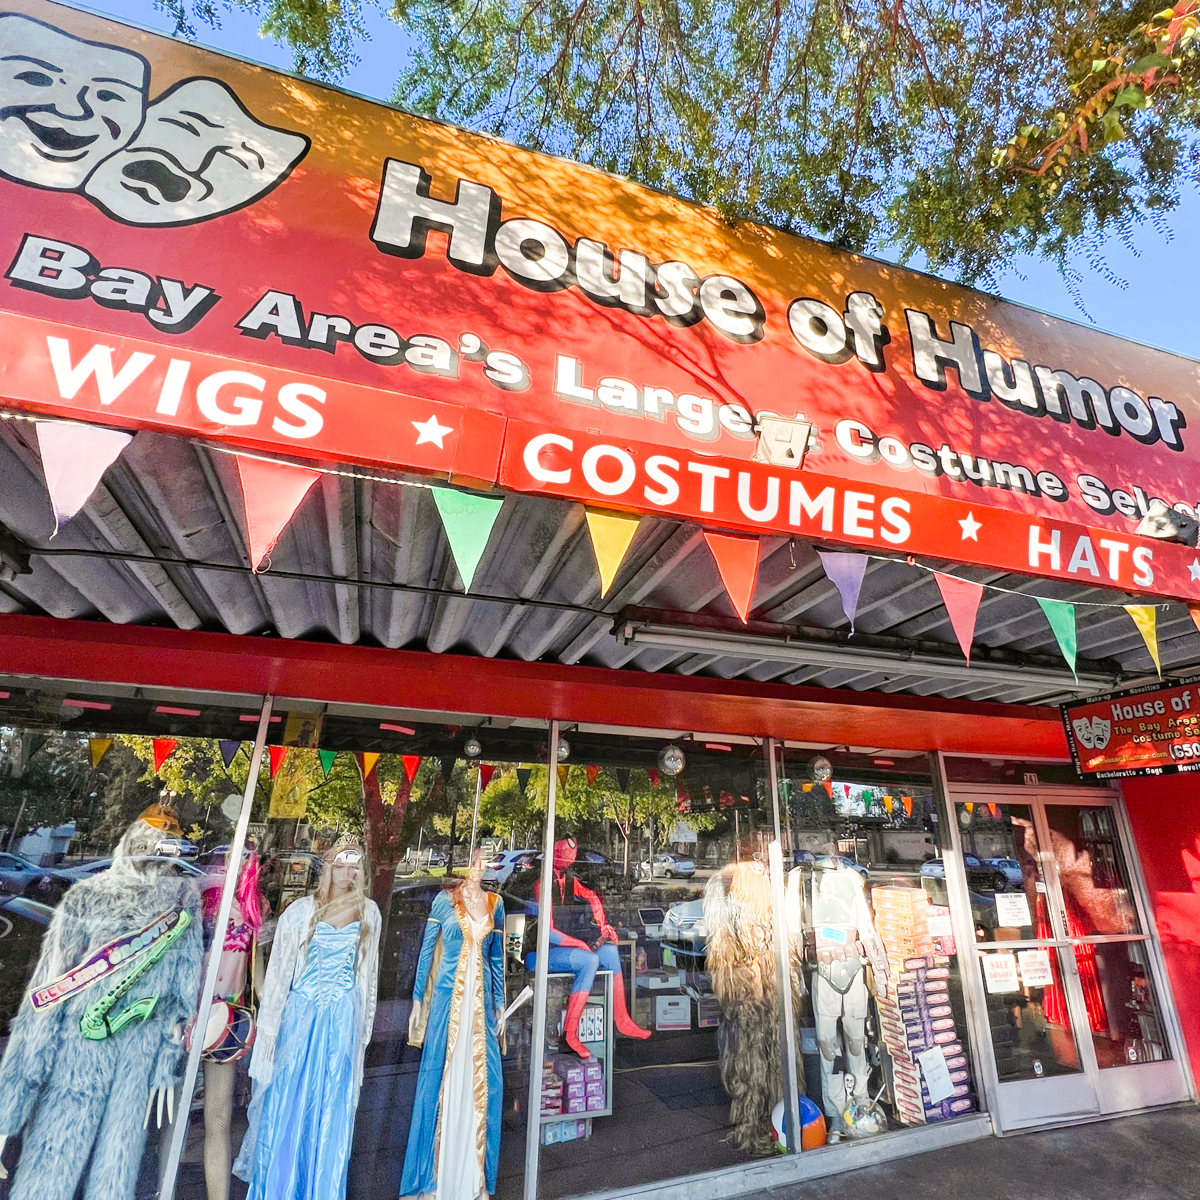 Step into a world of laughter and fun! 😃 From silly props and costumes to side-splitting gag gifts, House of Humor has the perfect ingredients to keep your spirits high and your smile wide.

#VisitRWC #RedwoodCity #RedwoodCityCA #DowntownRedwoodCity #SanMateoCounty #RWC